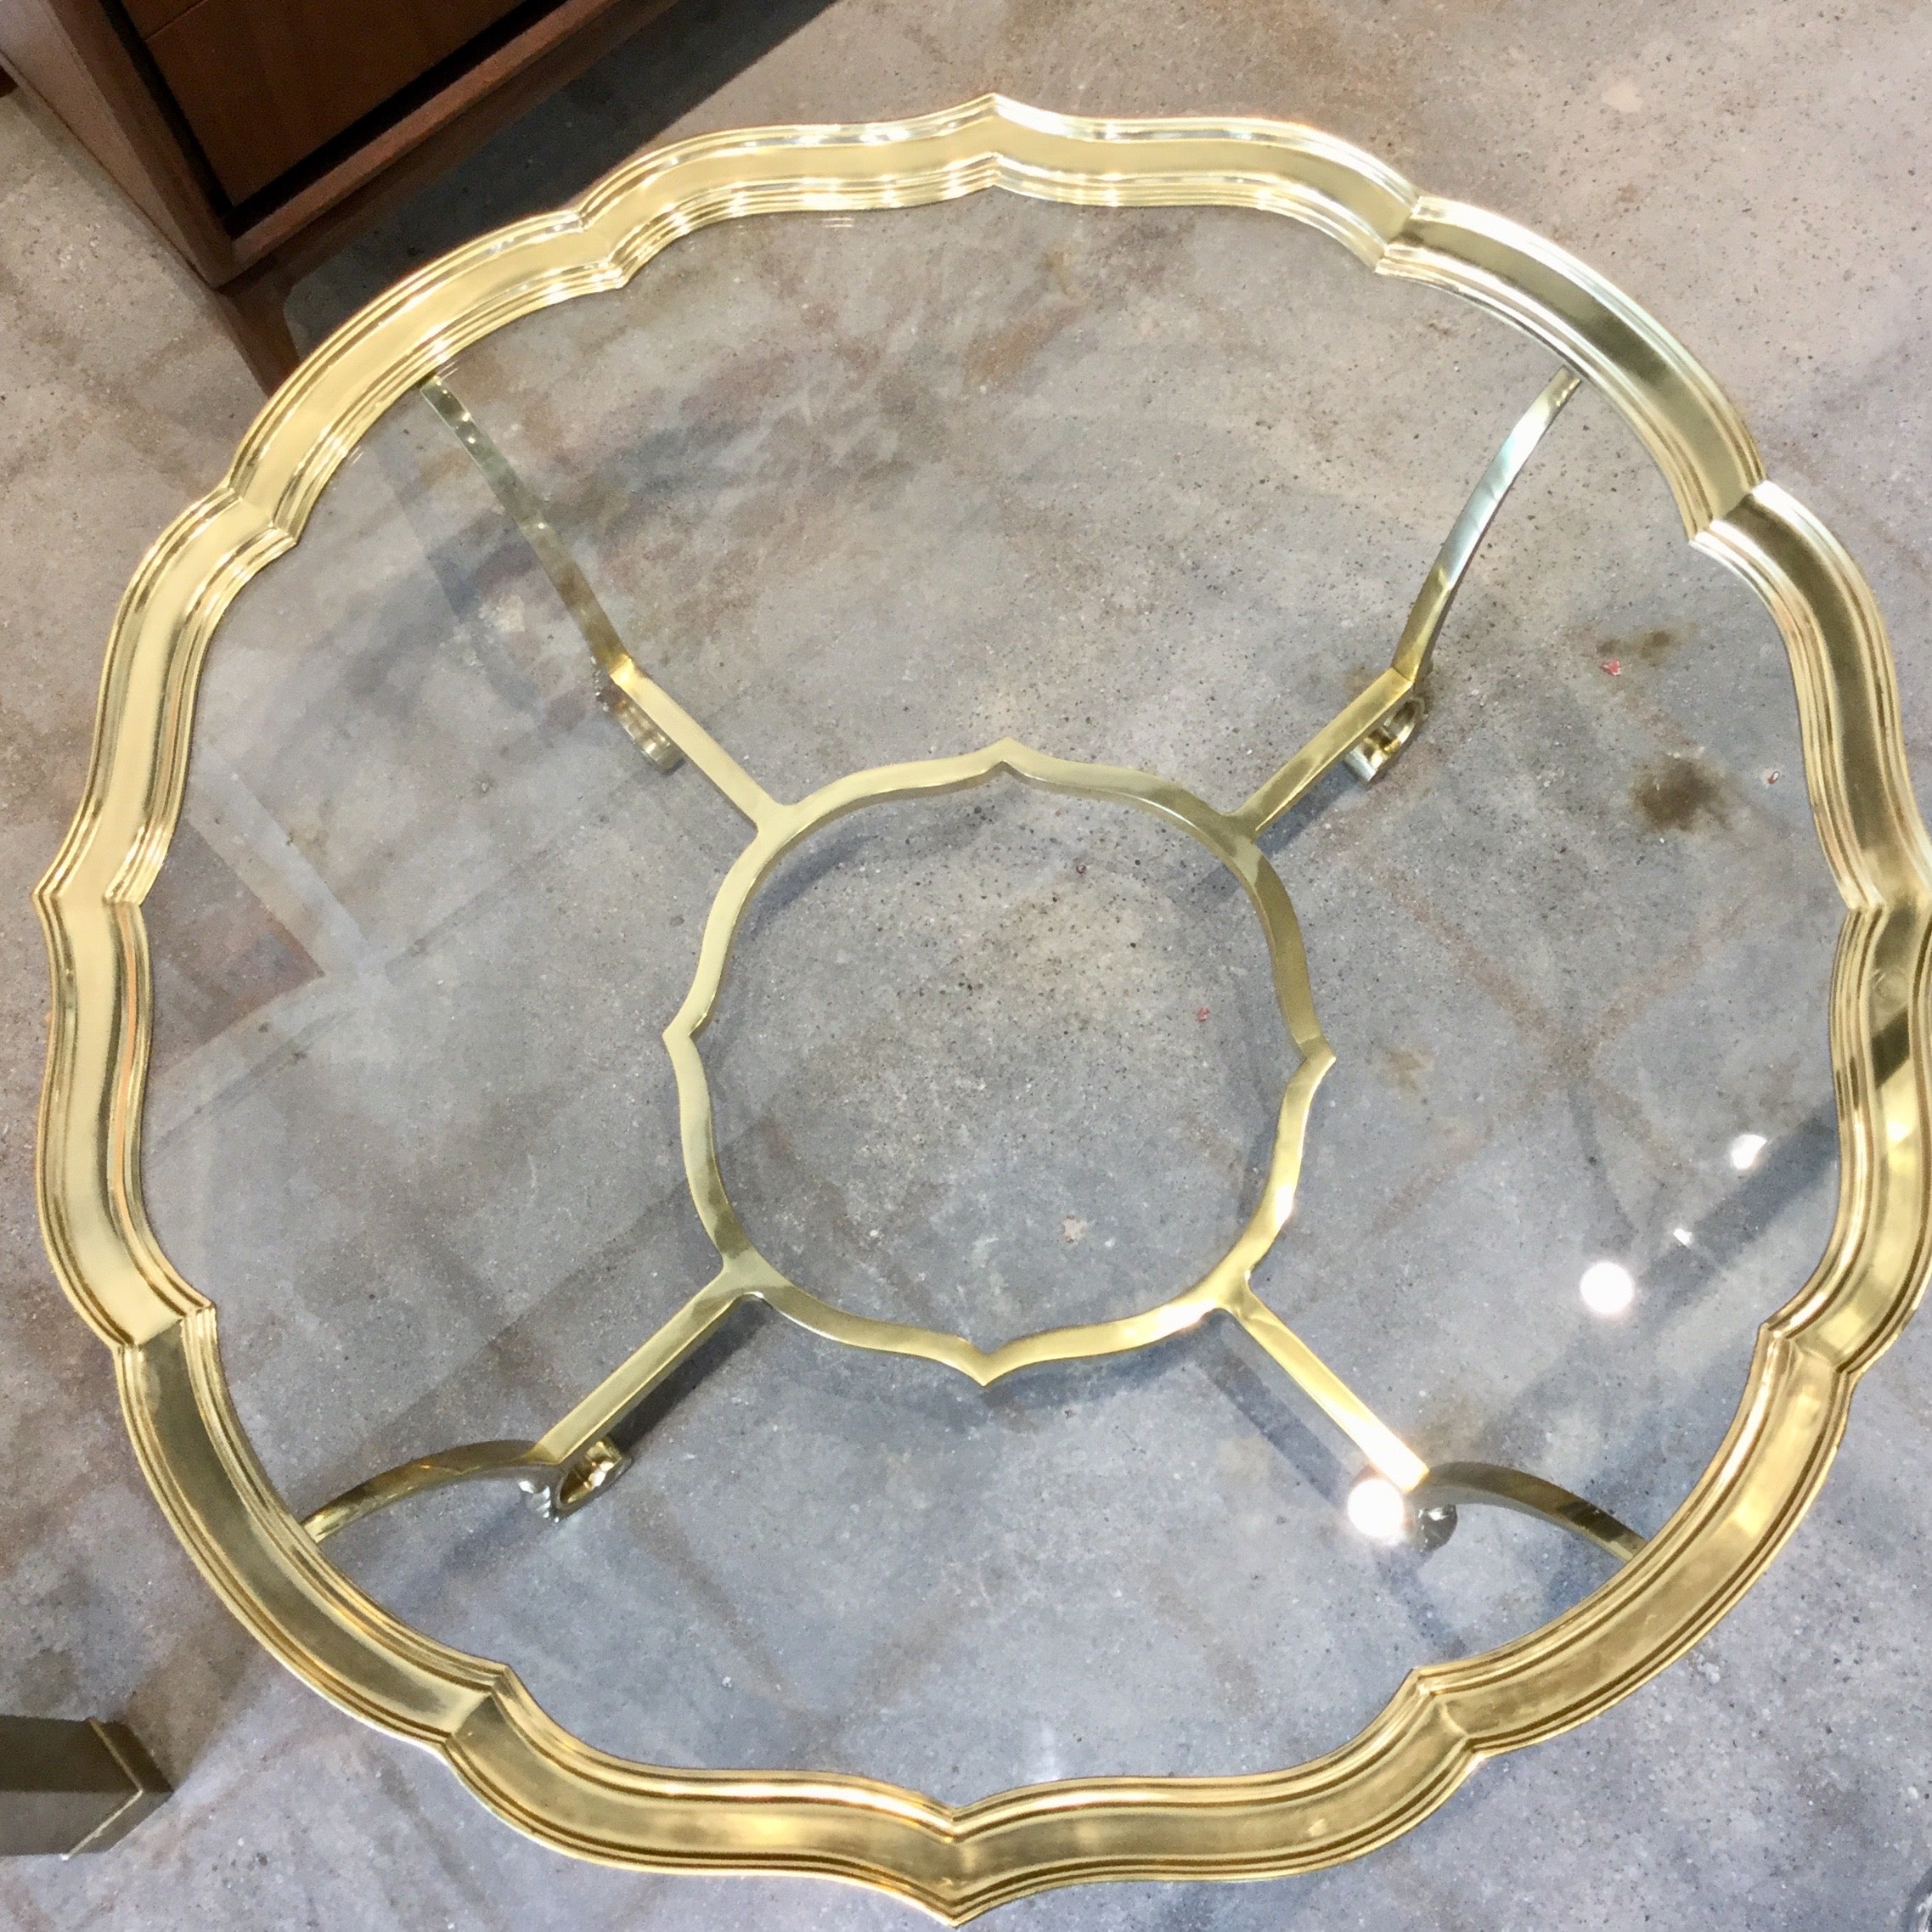 Vintage La Barge Scalloped Brass and Glass Coffee Table - Park + Eighth